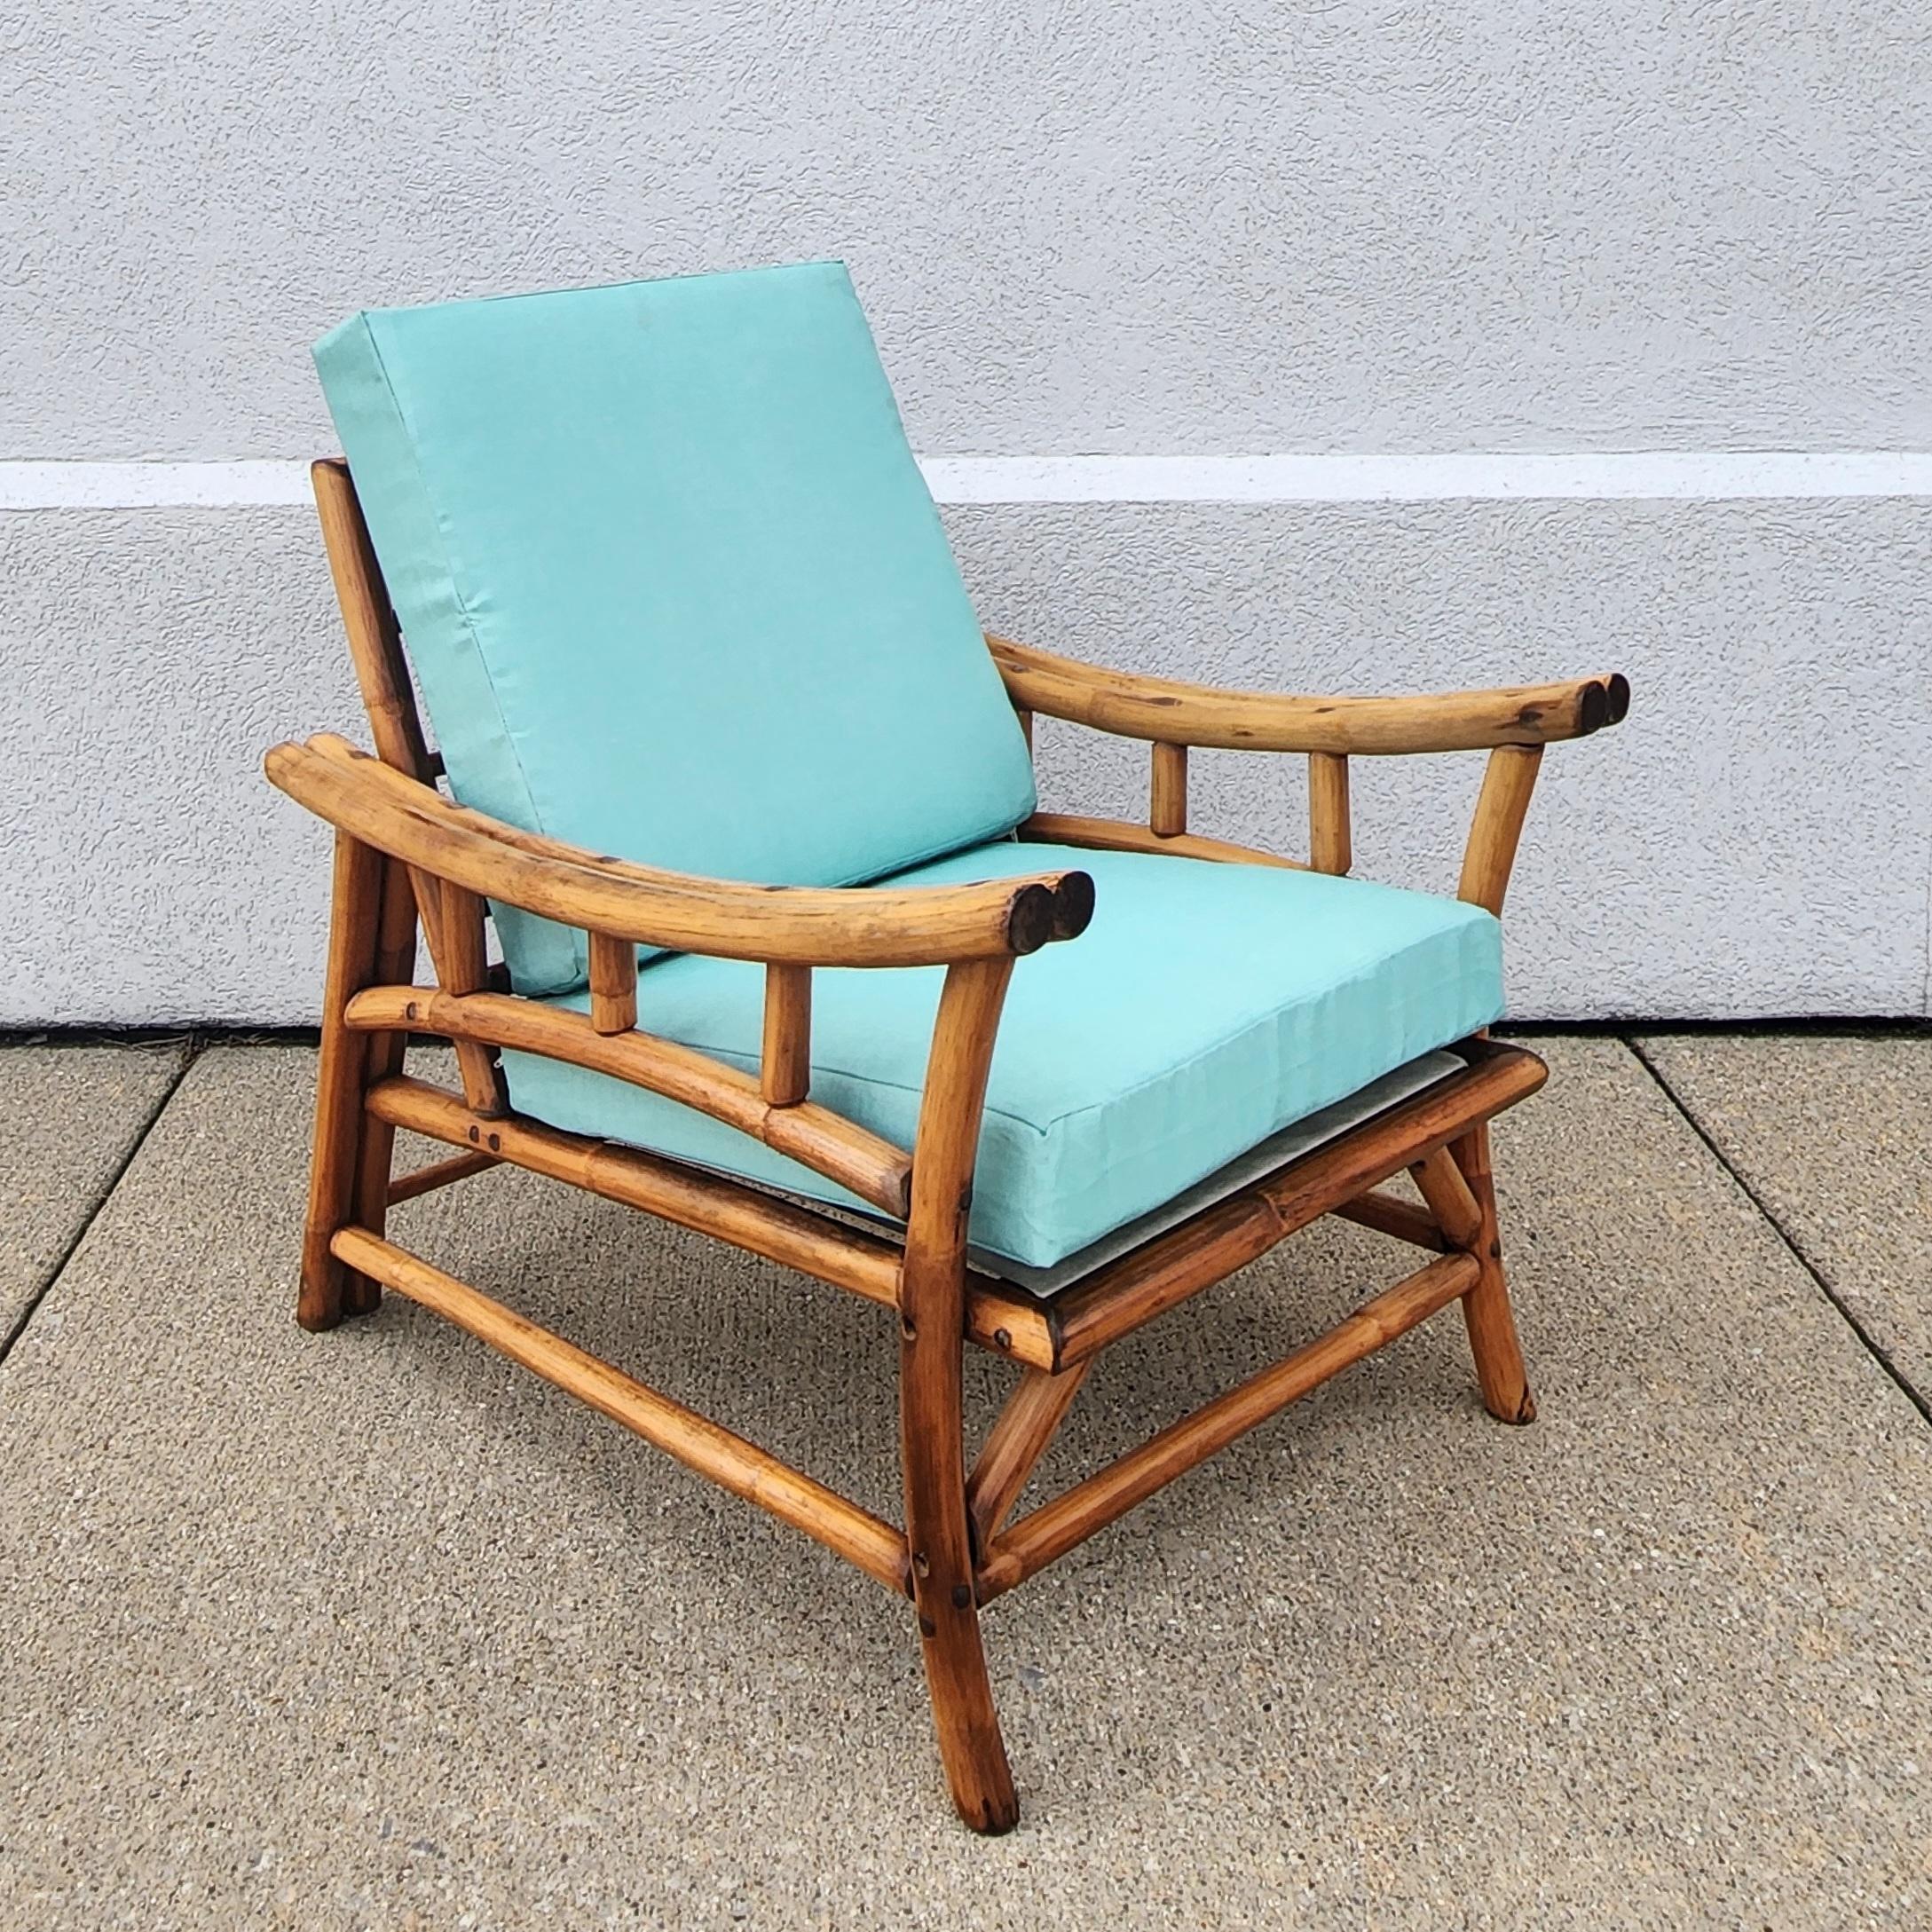 This is a unique Ficks Reed rattan side chair. Complete with new turquoise blue cushions that resemble a grass cloth finish. It has an original natural amber brown colored finish with a beautiful sculptural form. Wire coil type bottom and two metal